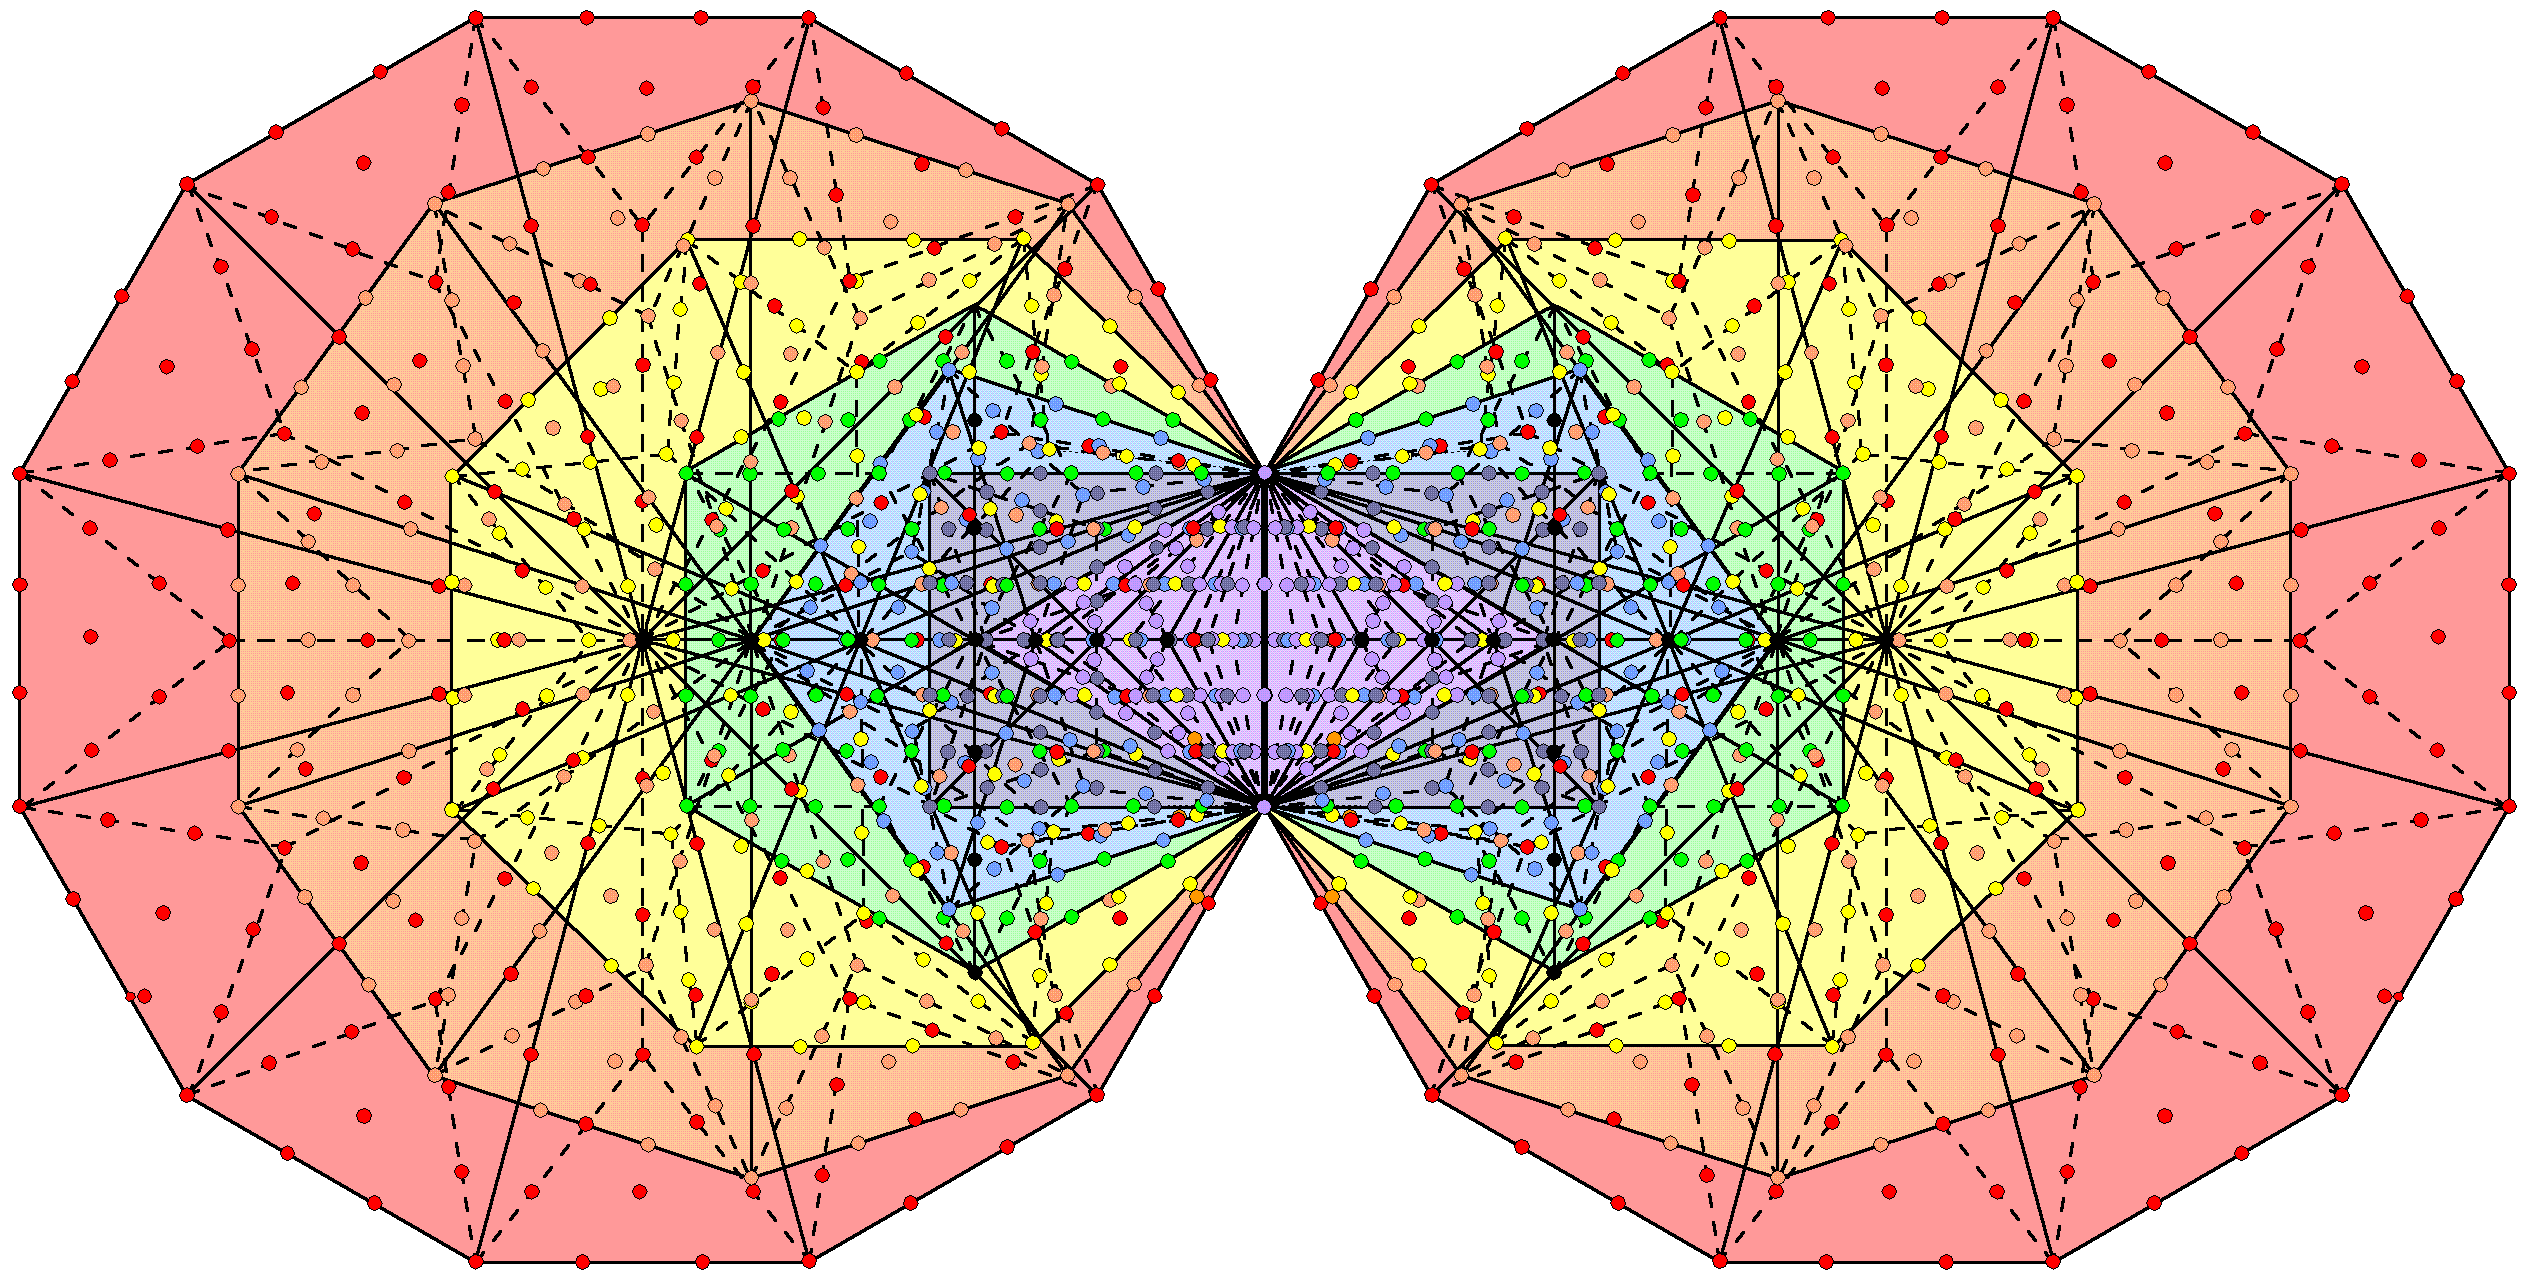 (24+1344) intrinsic yods in (7+7) enfolded Type B polygons